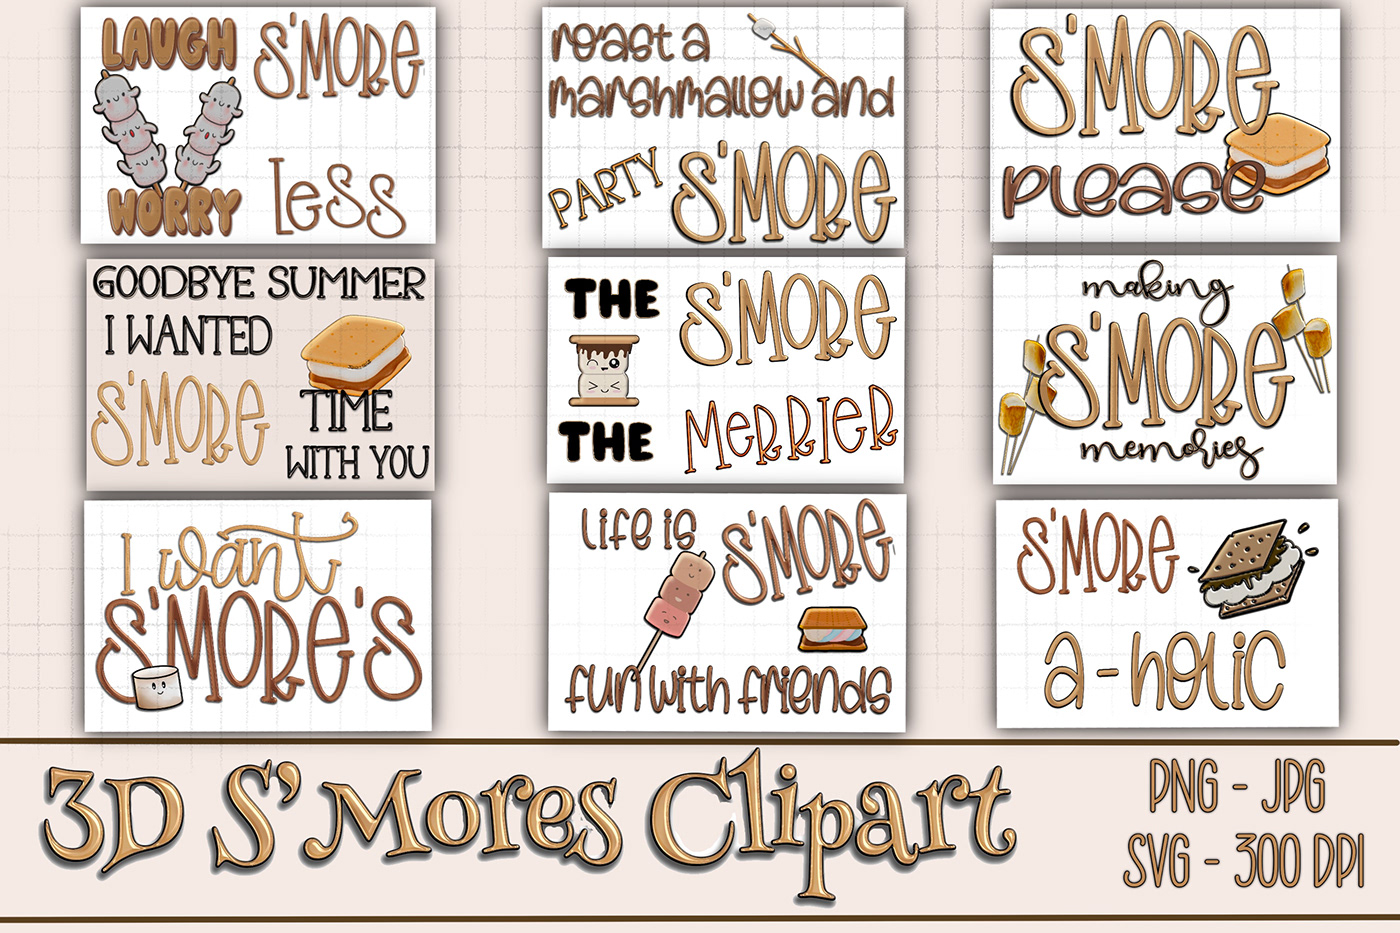 S'mores marshmallow chocolate clipart camping outdoors 3D images Campfire graham cracker s'more